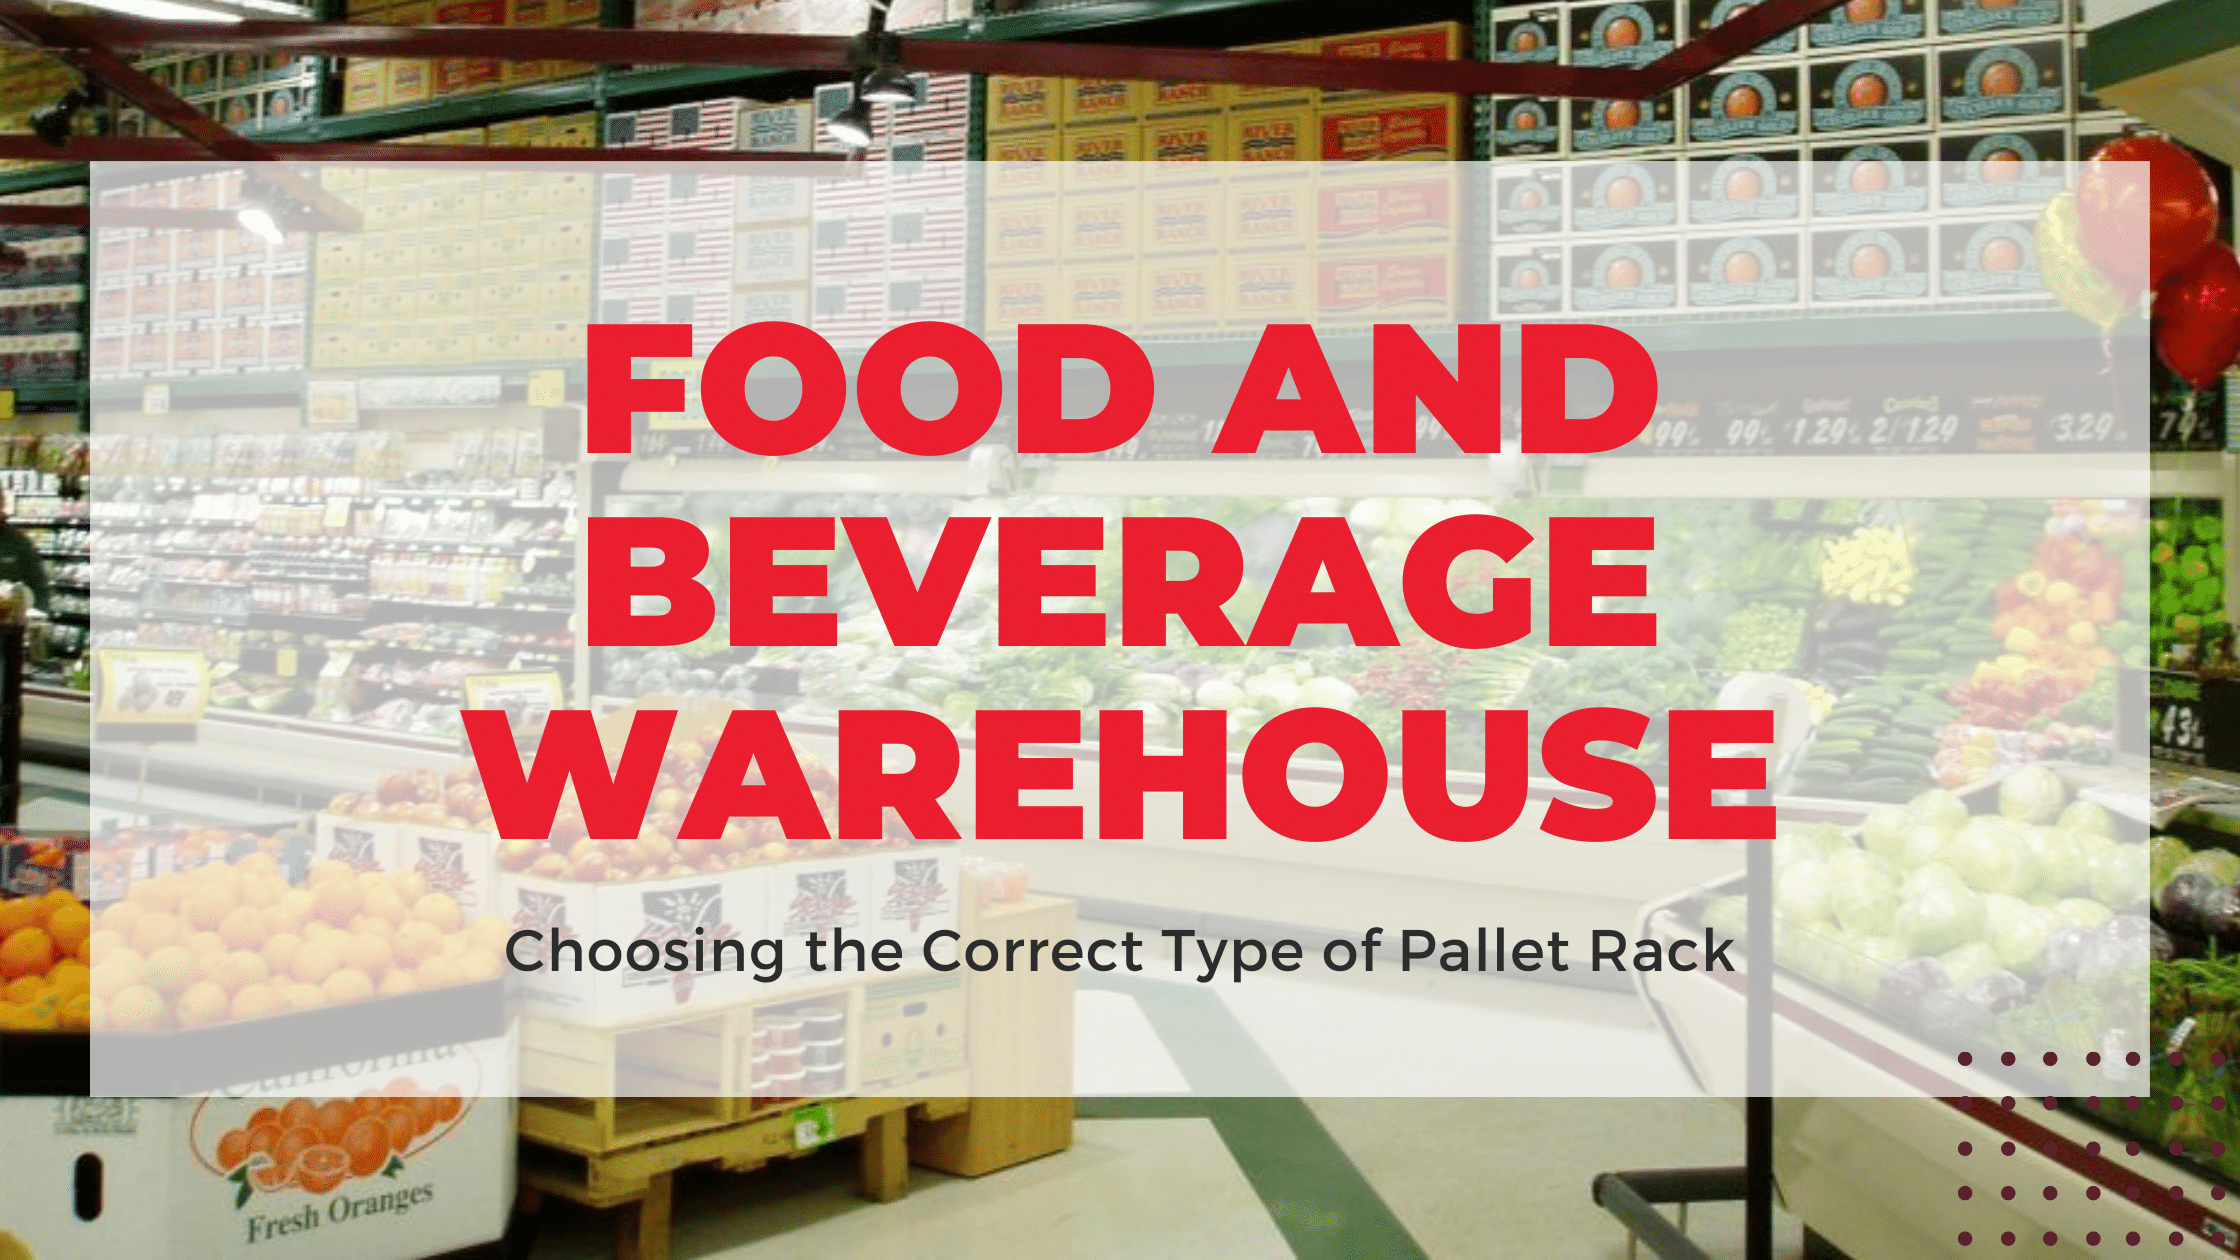 Food and beverage warehouse.